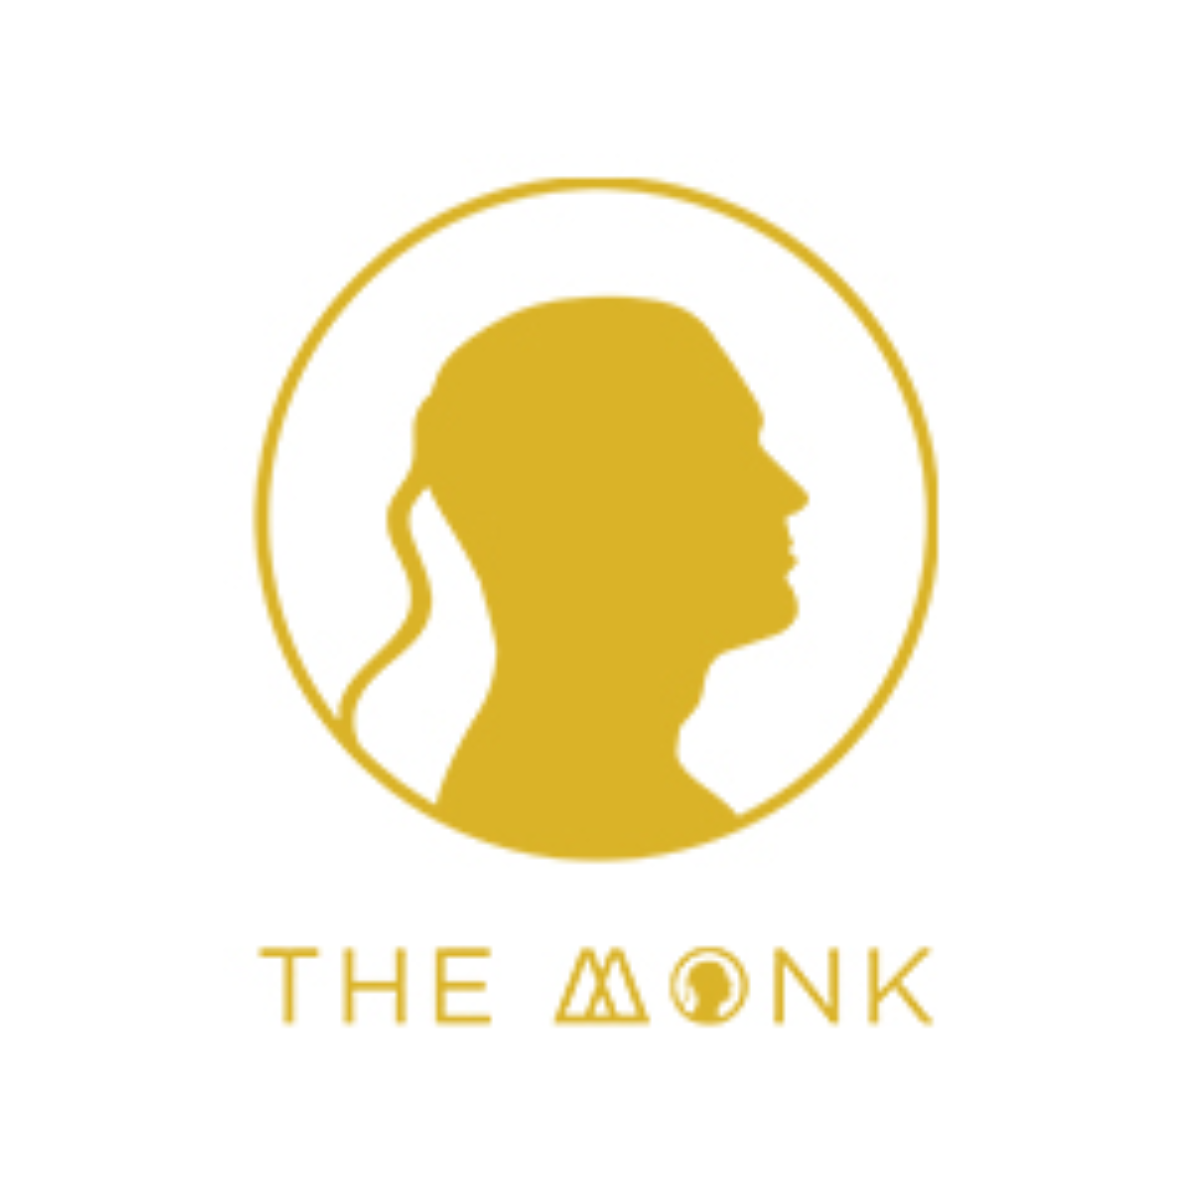 "The Monk eyewear collection at Optorium - premium sunglasses and frames for men and women with complimentary shipping. Browse now!"